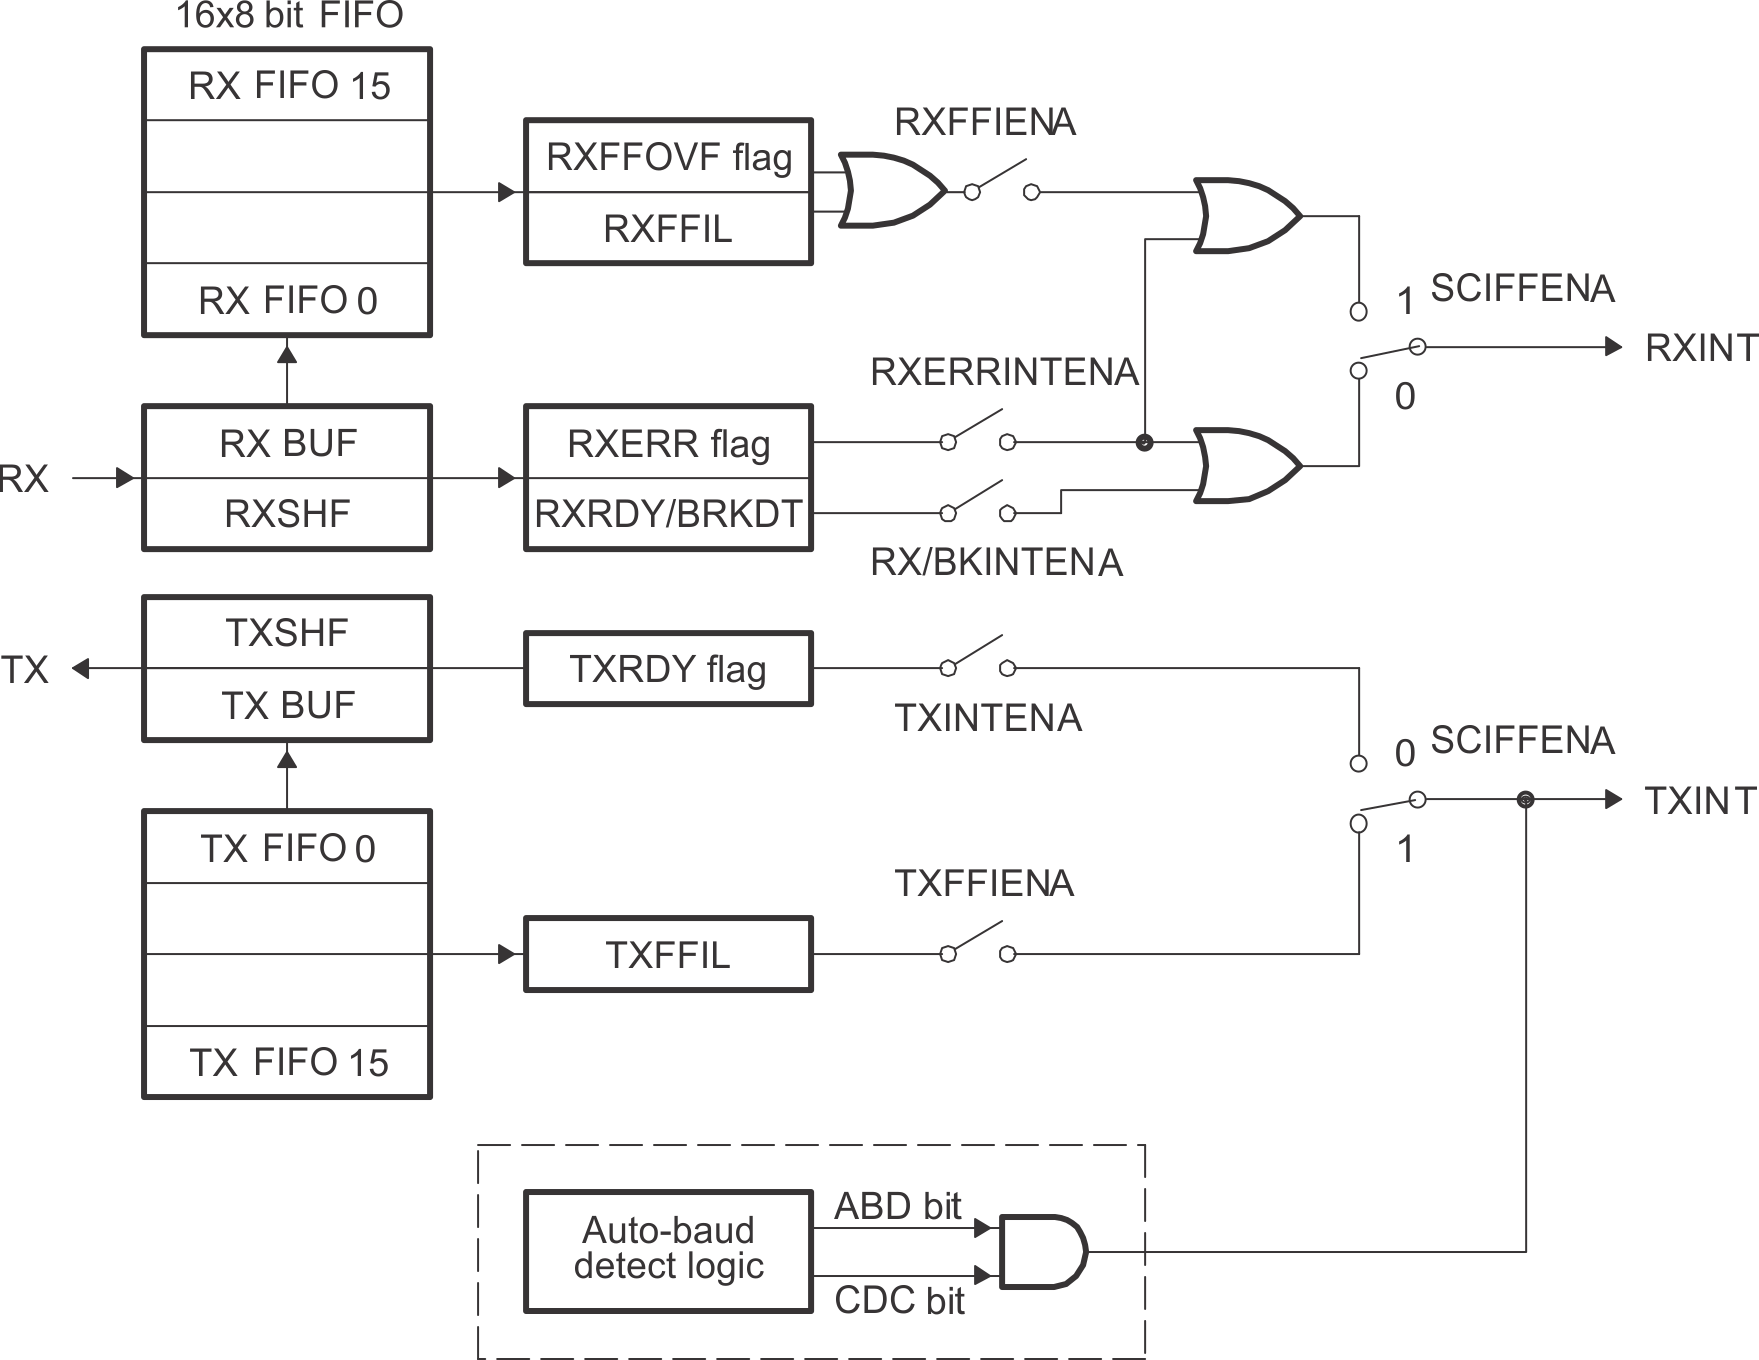 F280015x SCI FIFO
                    Interrupt Flags and Enable Logic